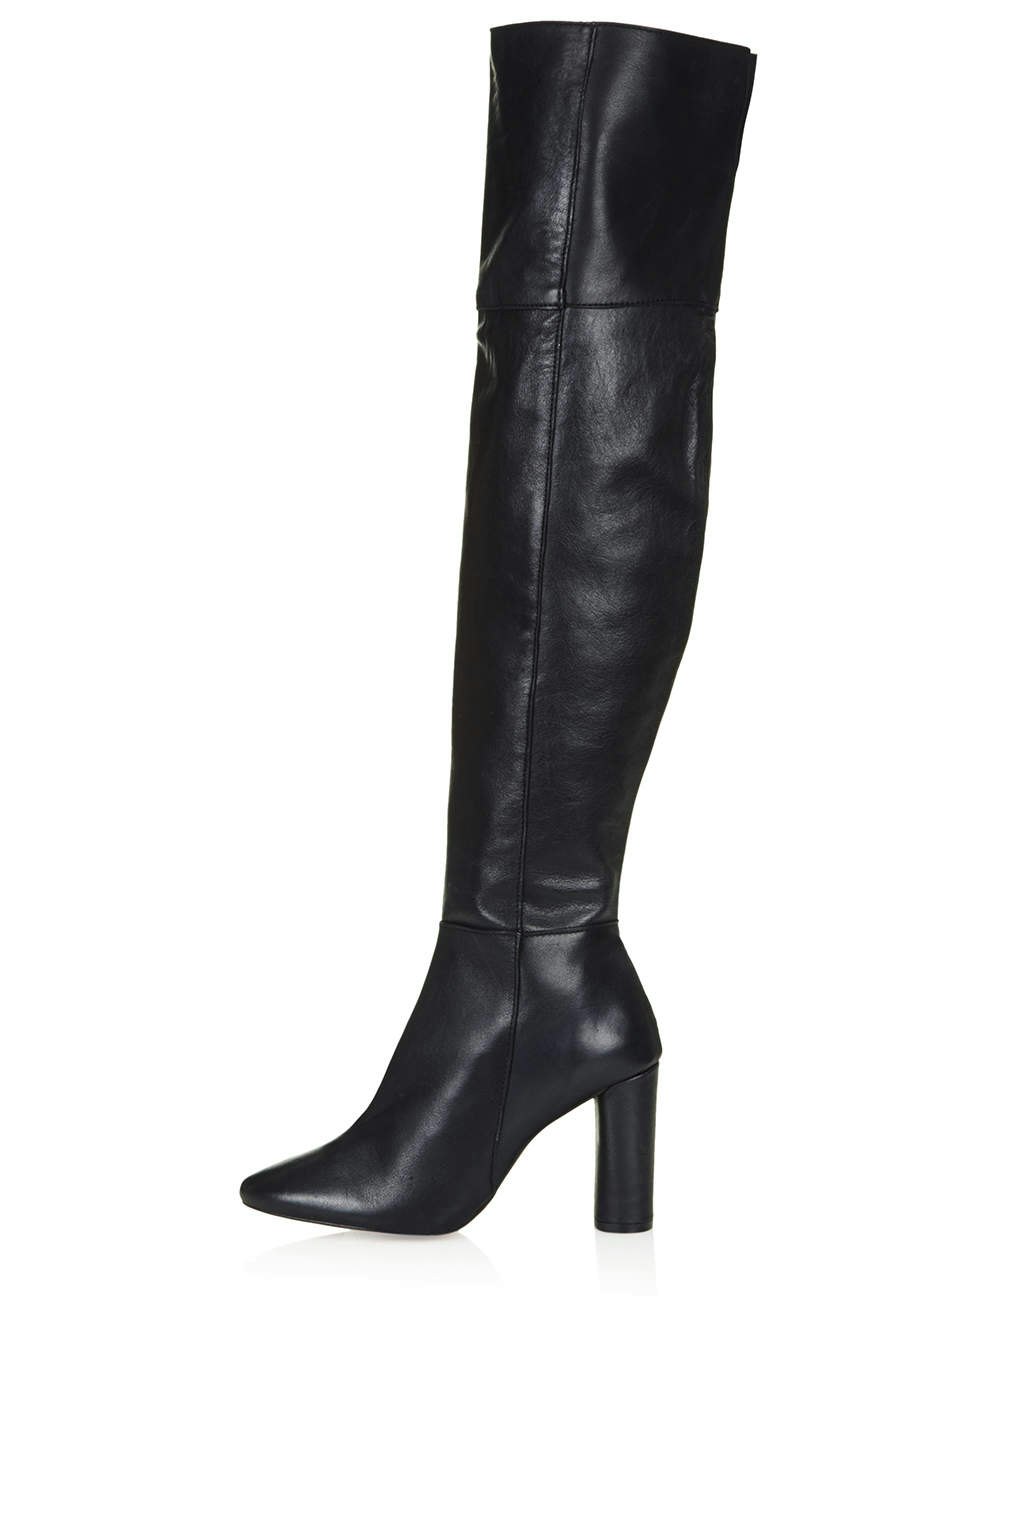 15 Affordable Over-The-Knee Boots You Need In Your Life Right This ...